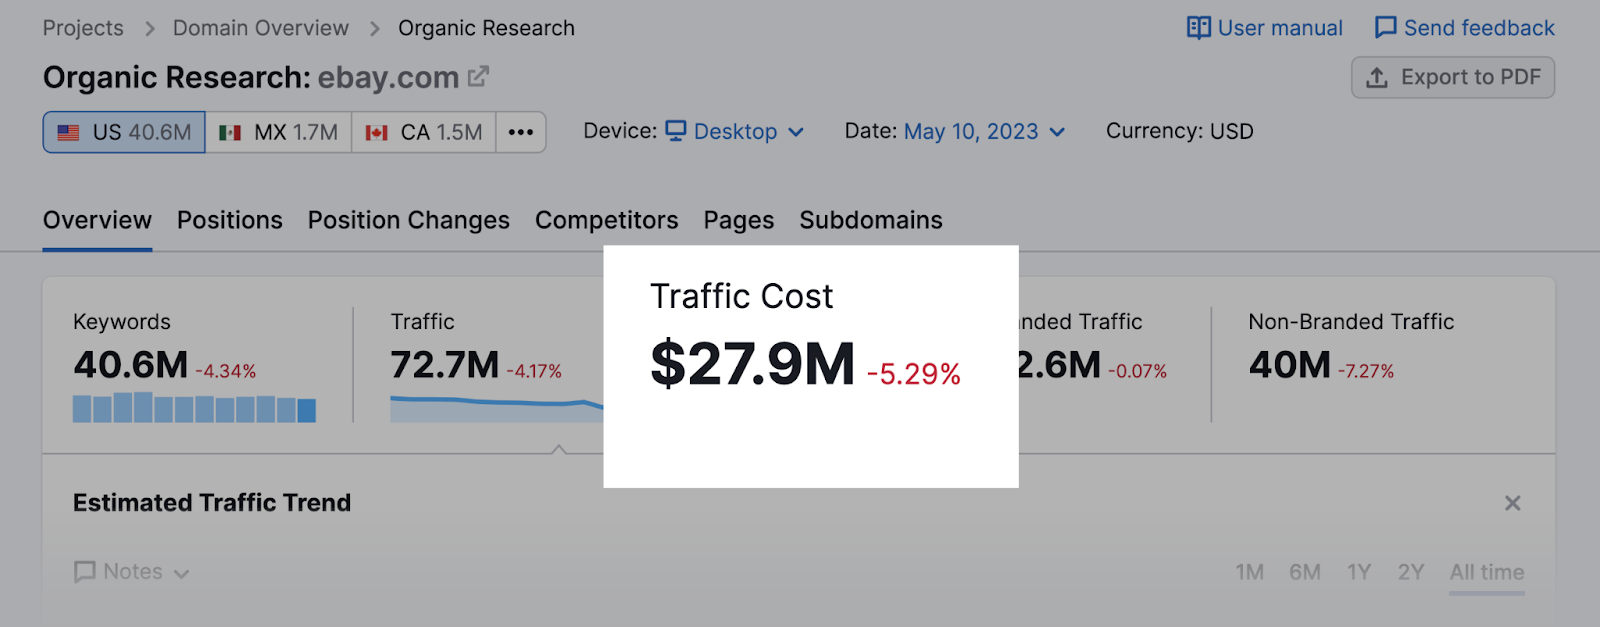 “Traffic Cost” metric highlighted